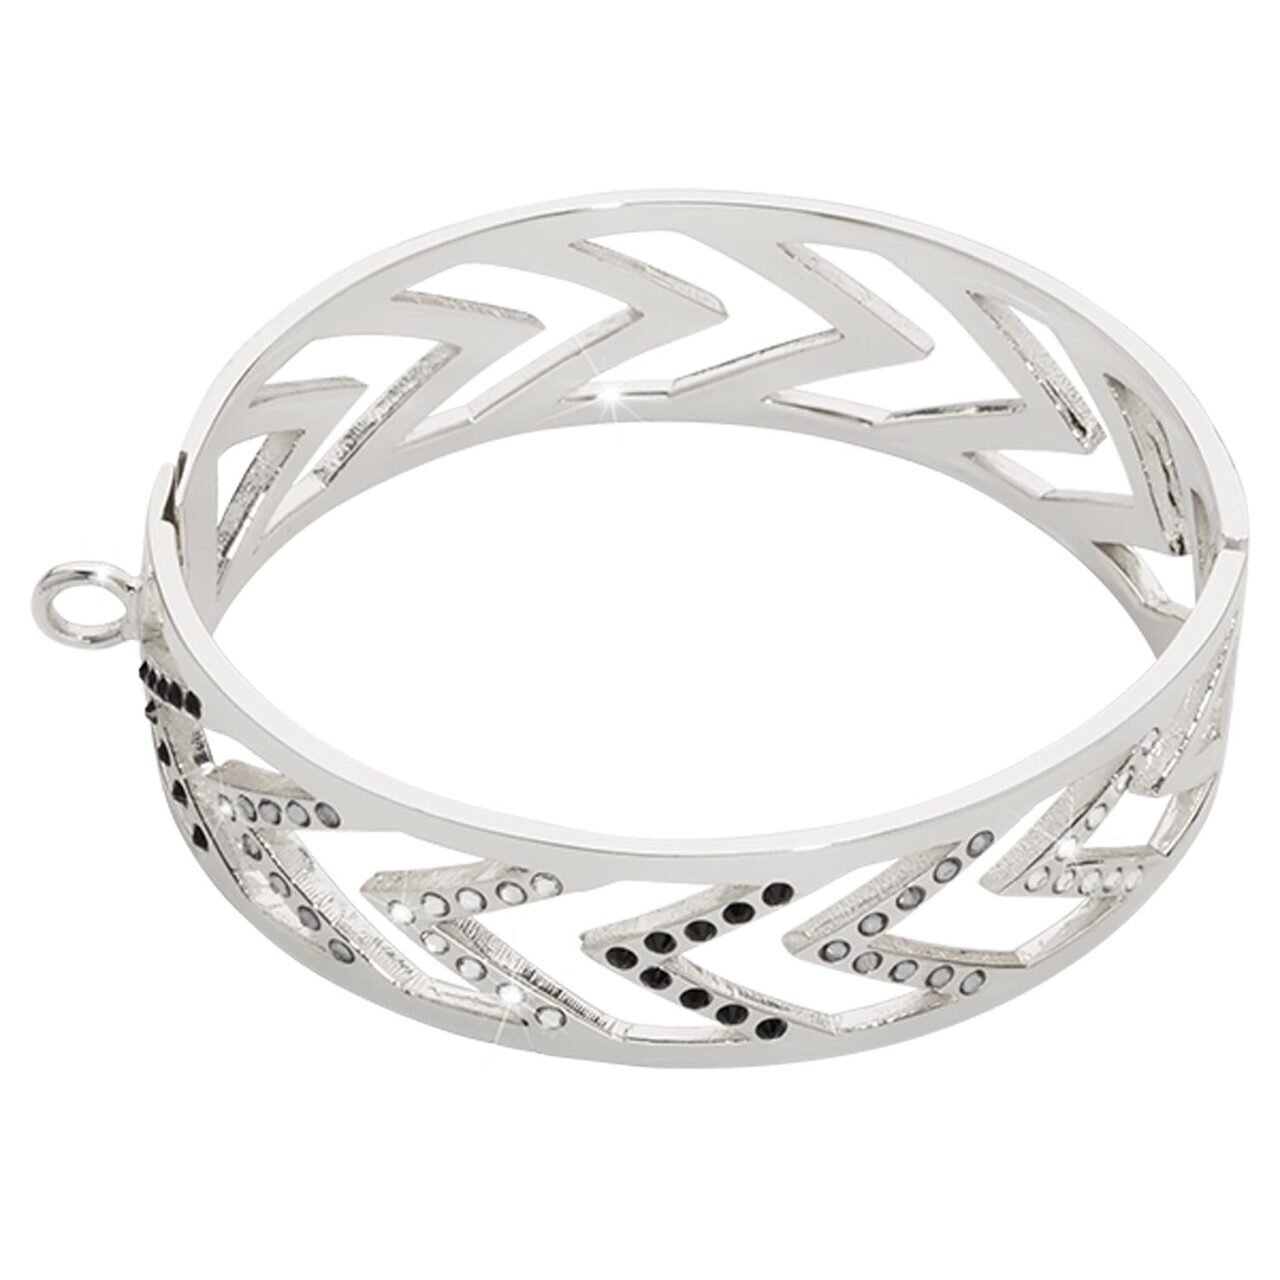 Nikki Lissoni Large Geometric Chevron Bangle of 2cm with One Loop To Attach A Charm Silver-plated 17cm B1140S17